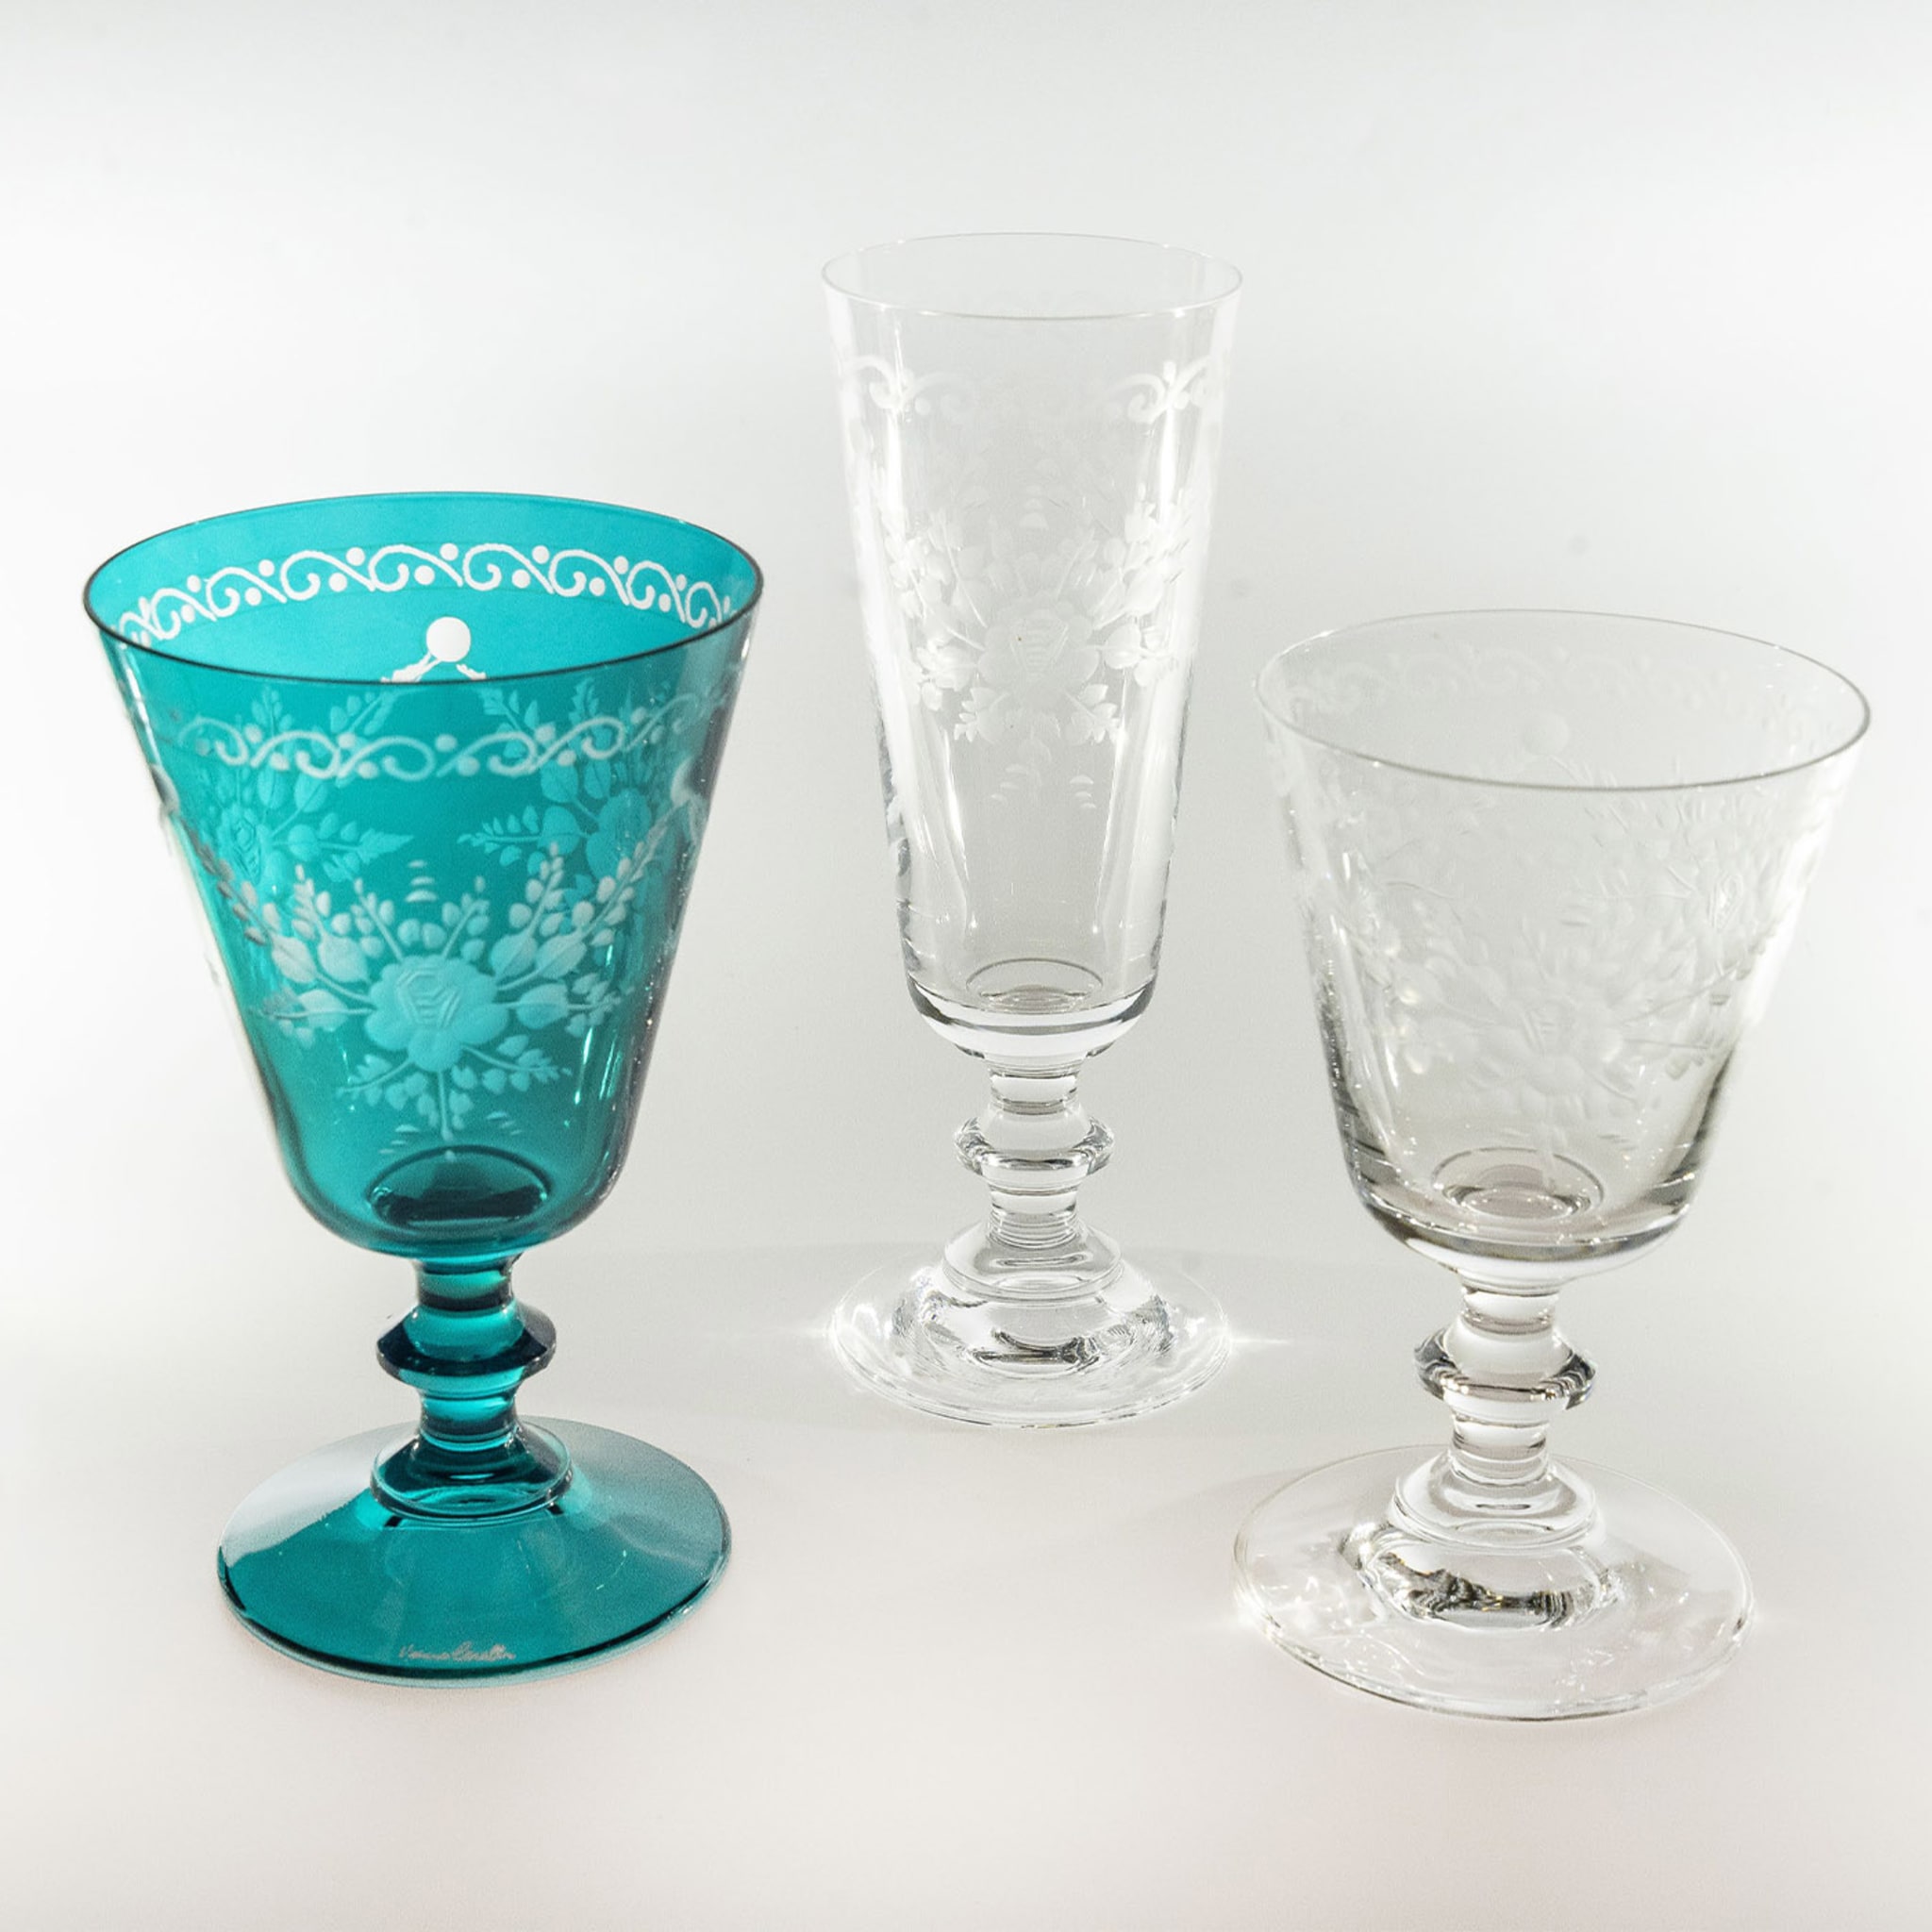 Vienna Set of 6 Etched Teal Water Glasses - Alternative view 1